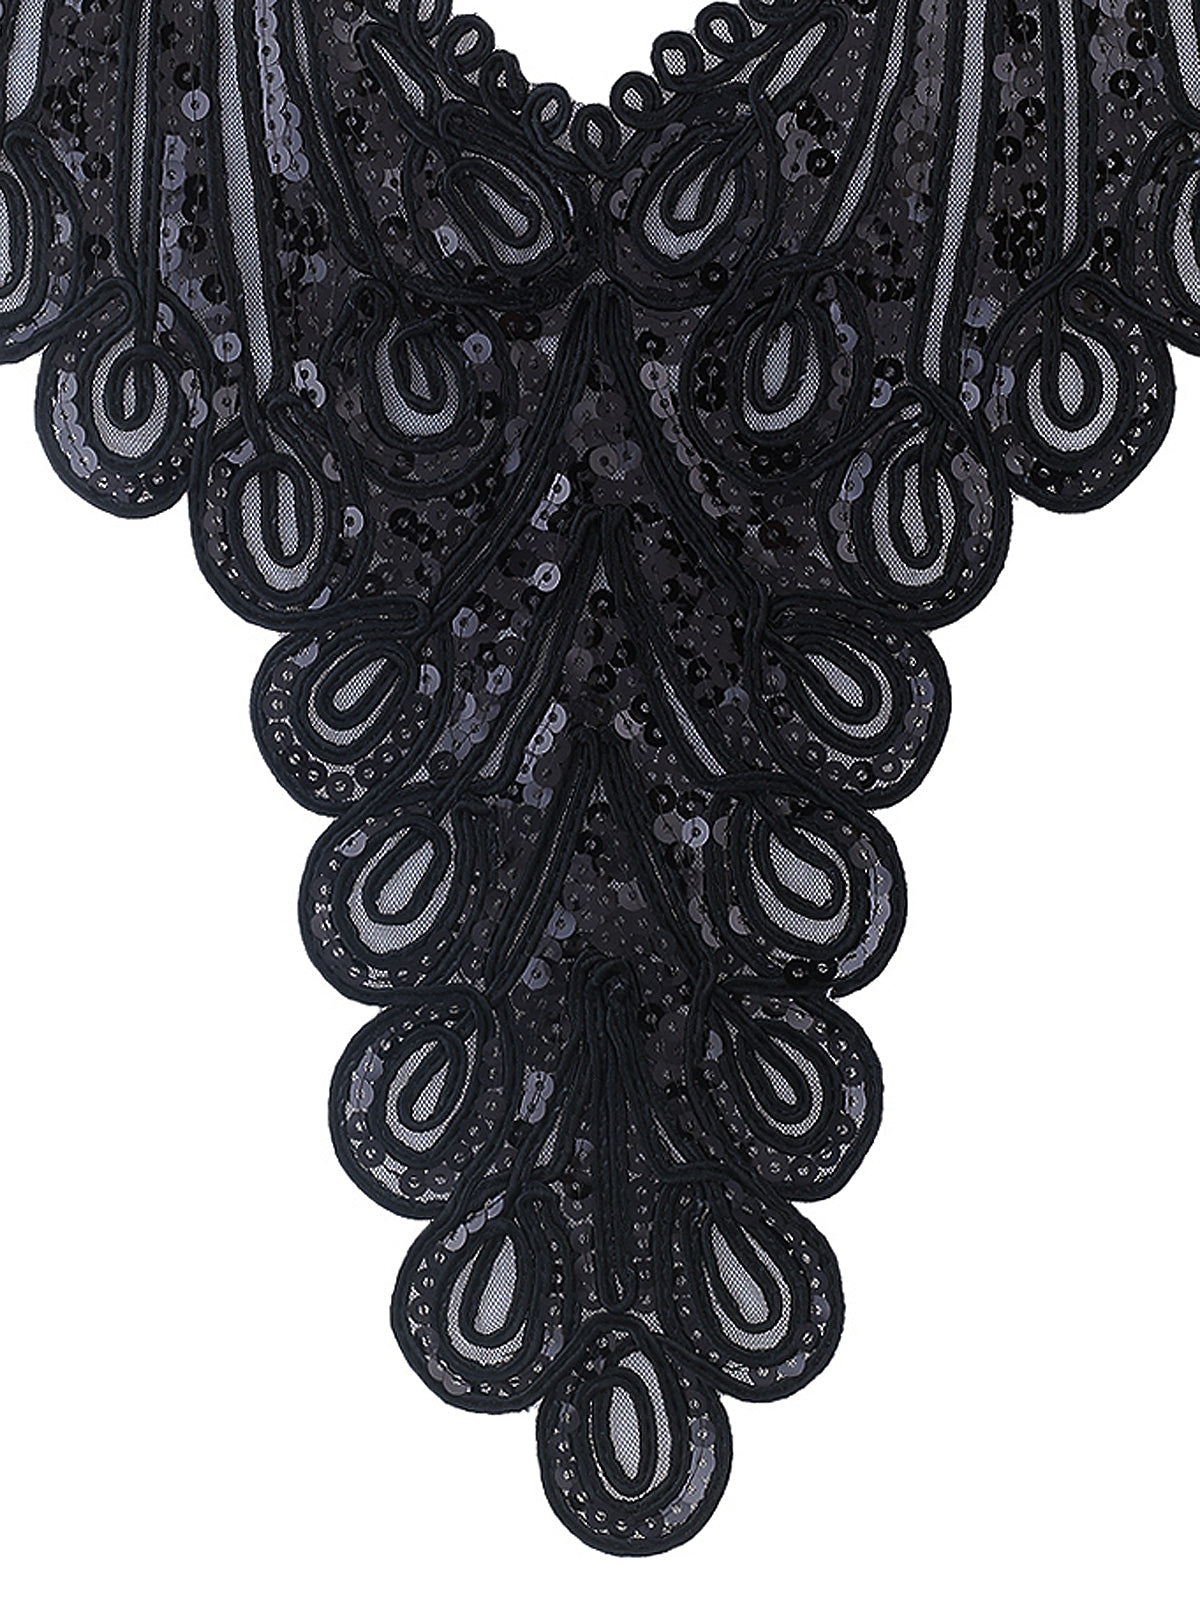 Ribbon Embroidered Black Sewing Neck Applique